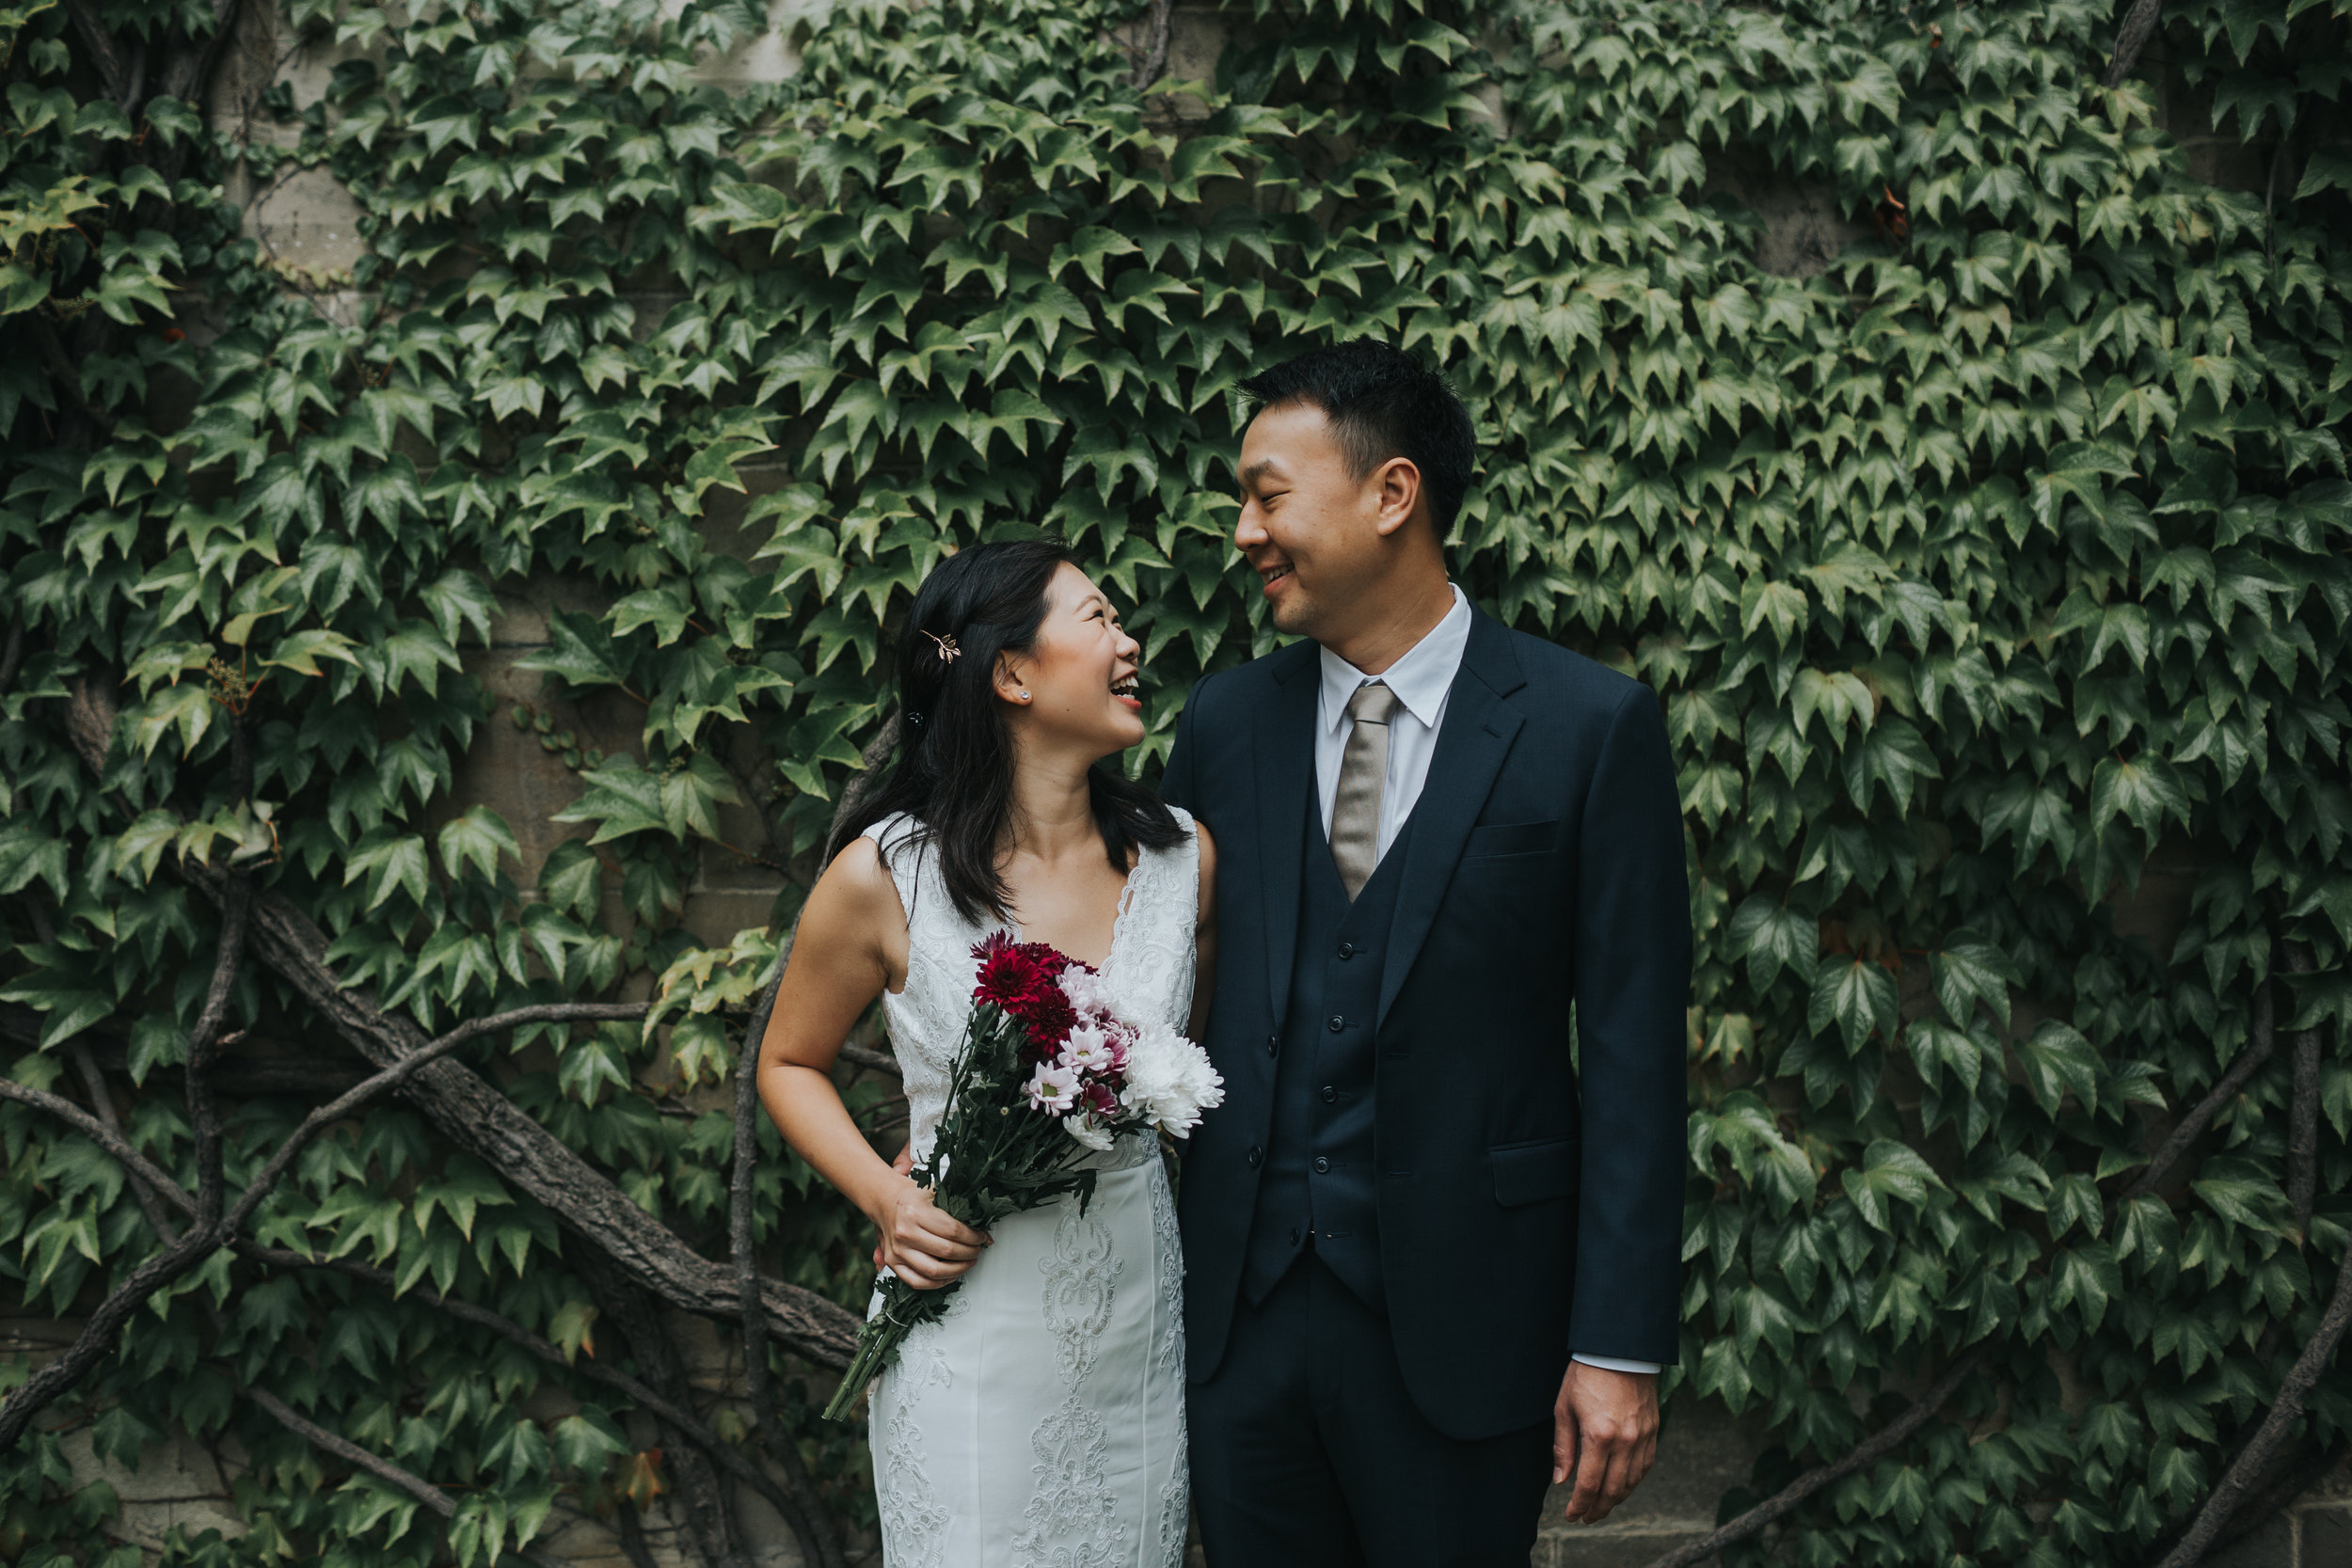 Bride and Groom laughing together in front of a wall full of ivy.  